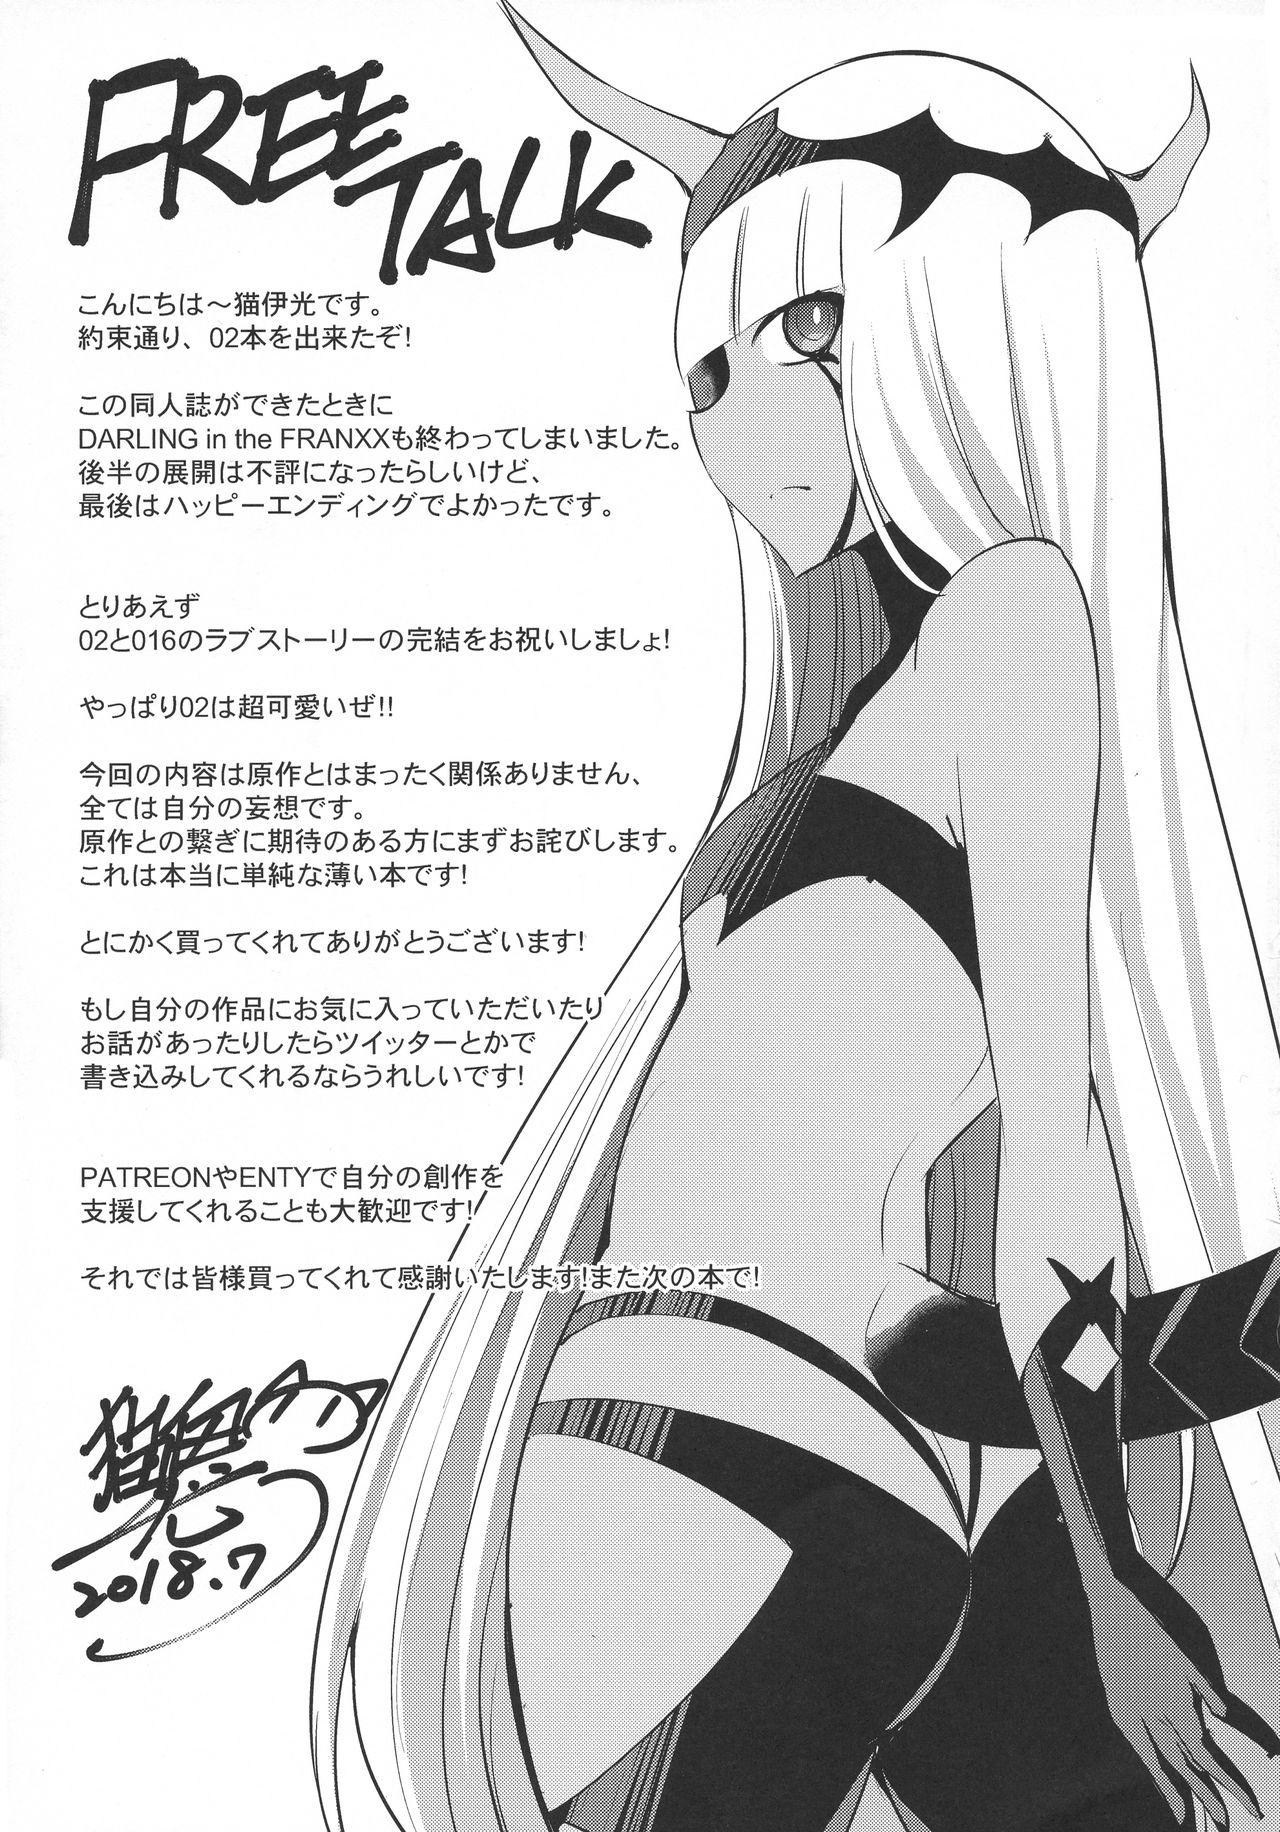 Periscope Darling in the One and Two - Darling in the franxx Massage - Page 16